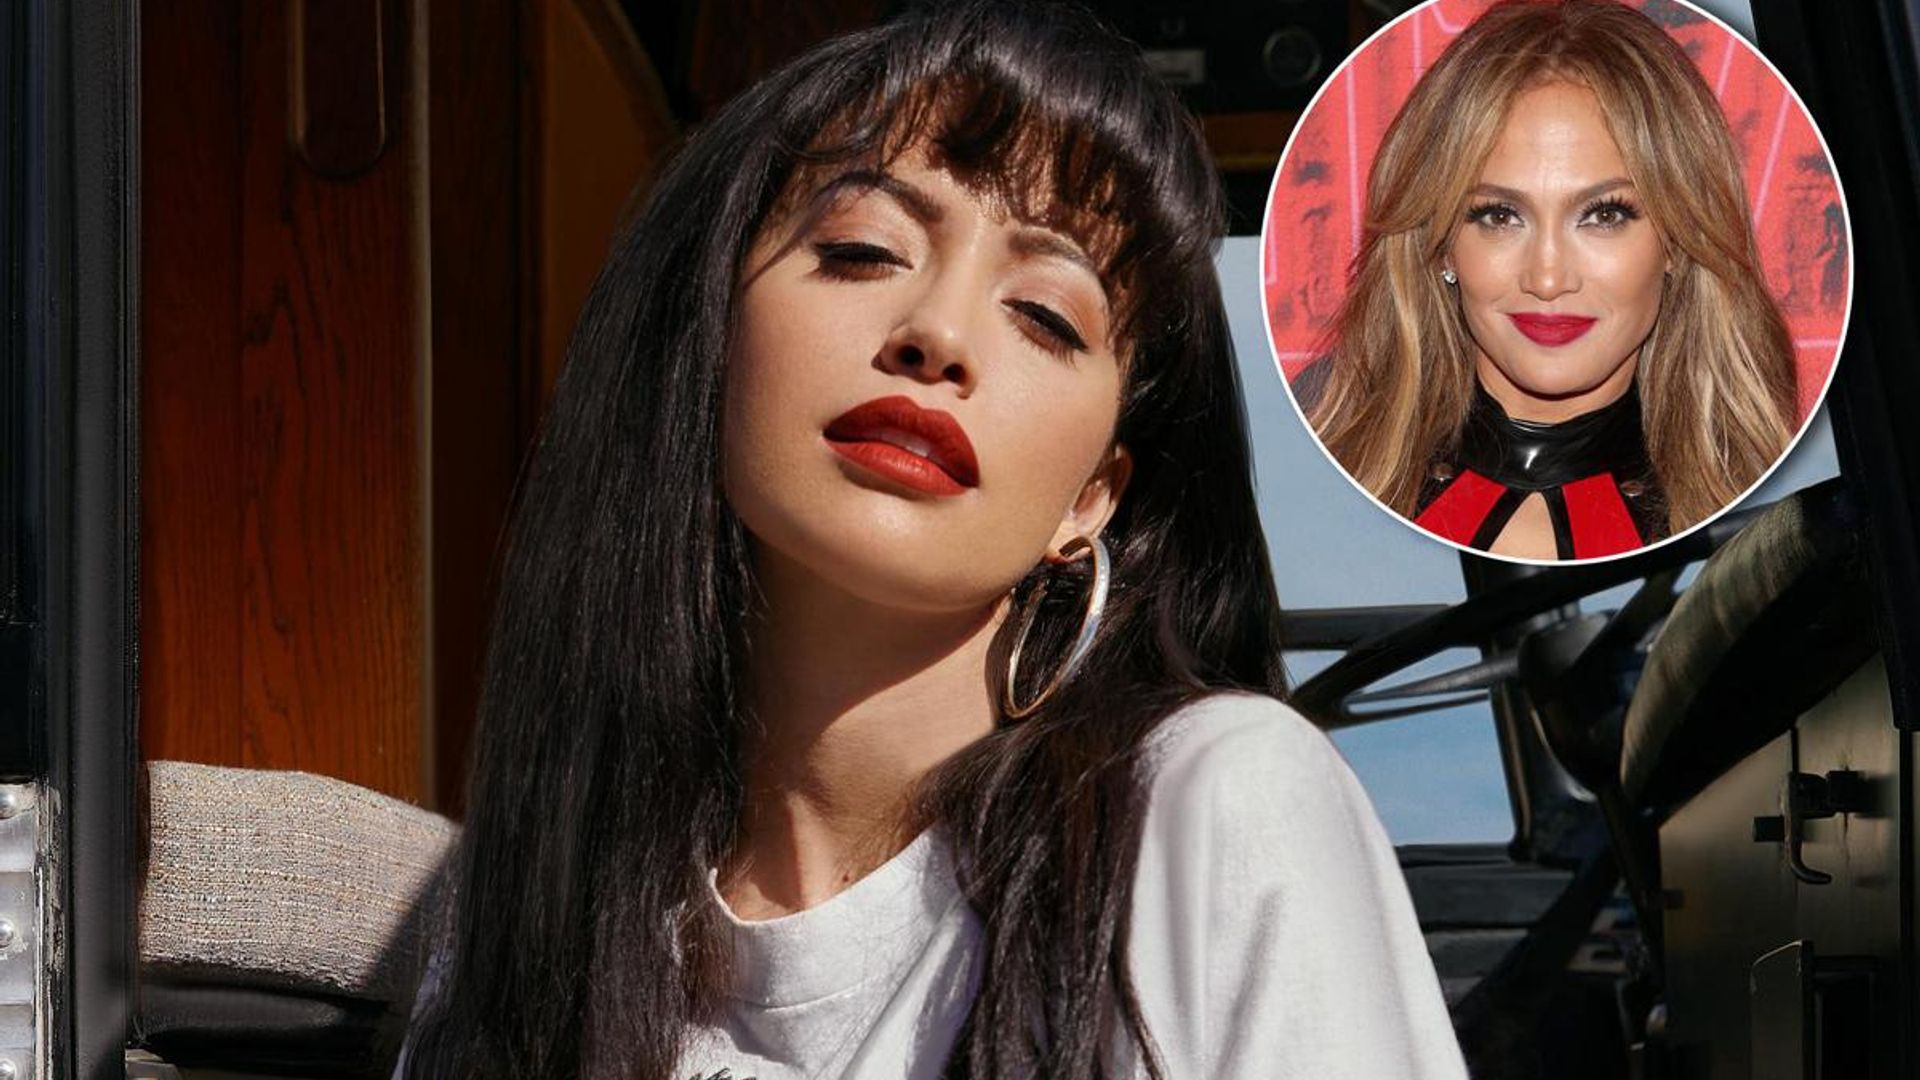 ‘Selena: The Series’ star Christian Serratos talks playing the Queen of Tejano Music after Jennifer Lopez